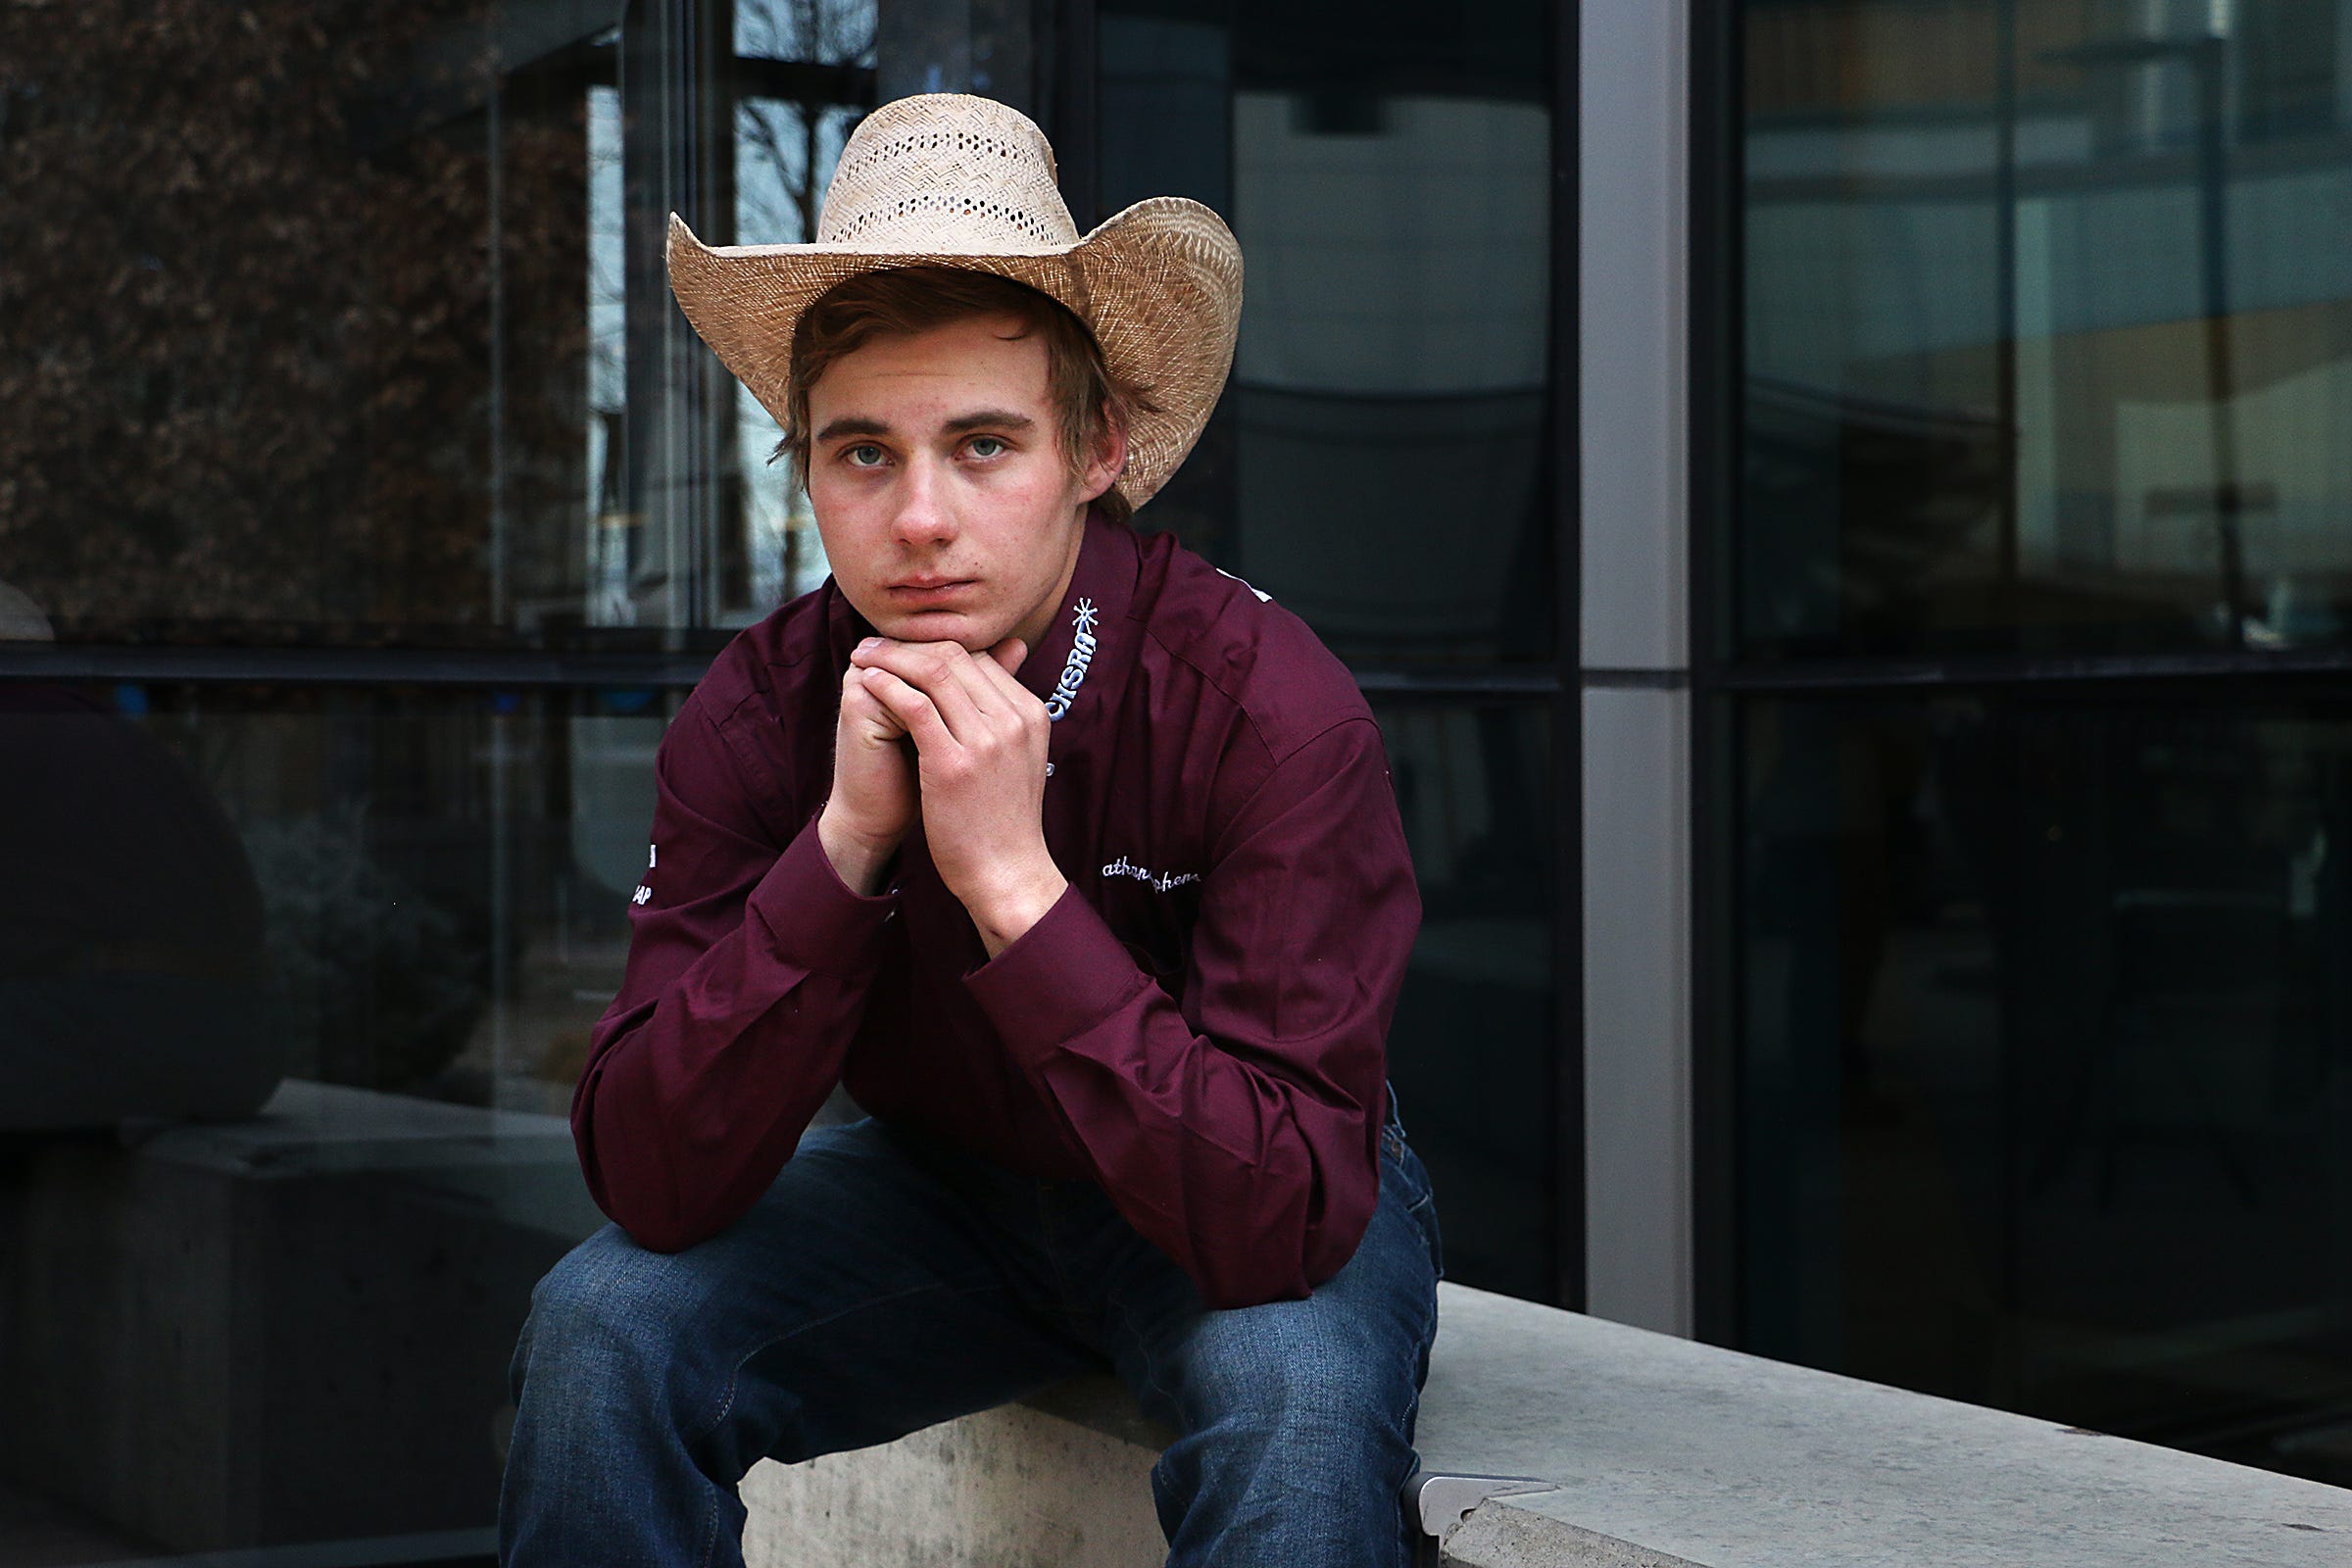 Nathanial Stephens, grandson of Judy Dover, poses for a portrait while sitting outside on a bench at Renown Regional Medical Center in Reno on Feb. 13, 2021.  Stephens would sit in this exact spot while waiting and hoping to visit his grandmother in the hospital before she passed from COVID-19.